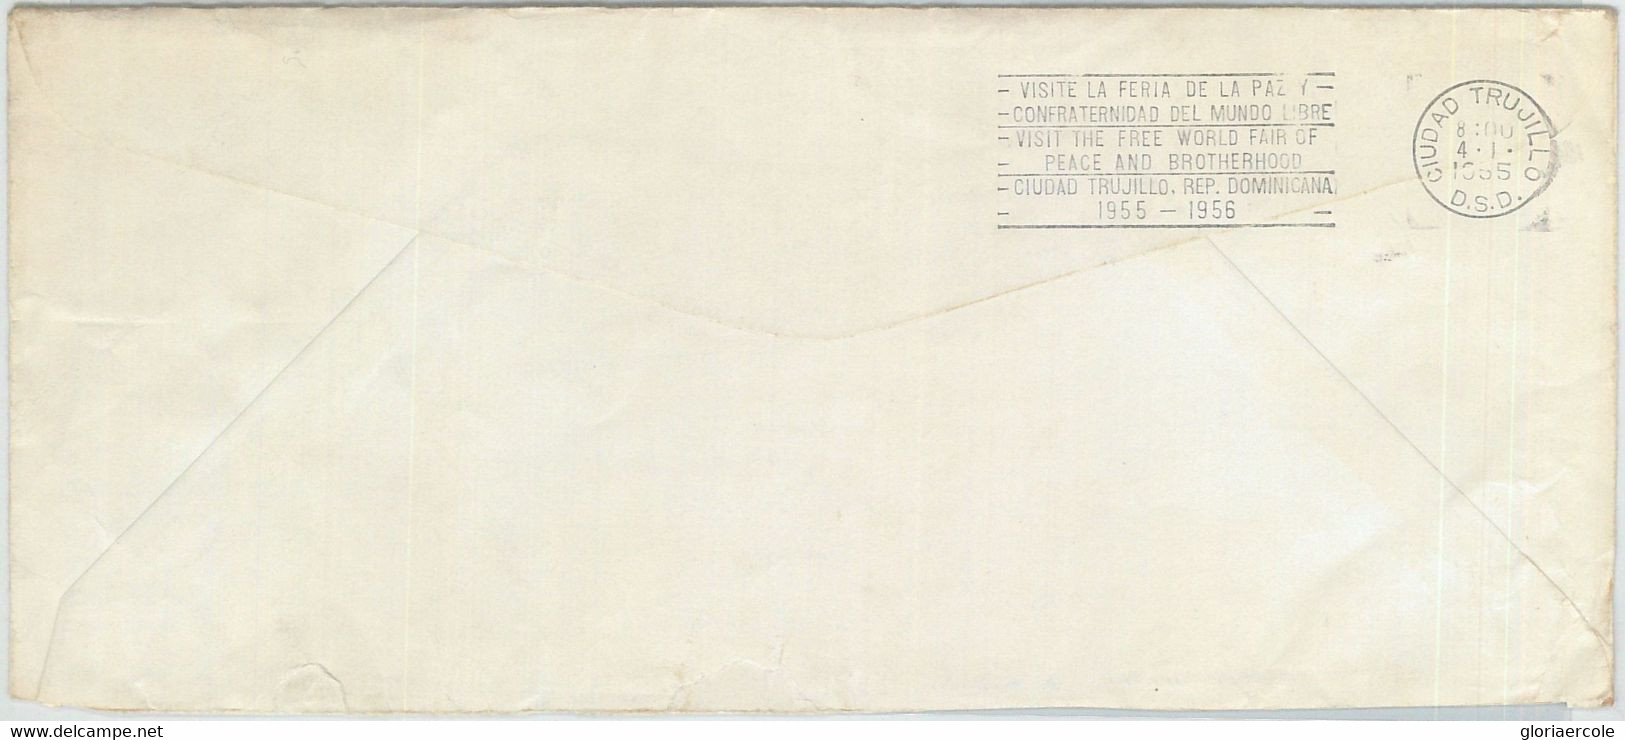 79005 - DOMINICANA - POSTAL HISTORY -  OVERSIZED COVER From VILLA ISABEL  1955 - Dominicaine (République)